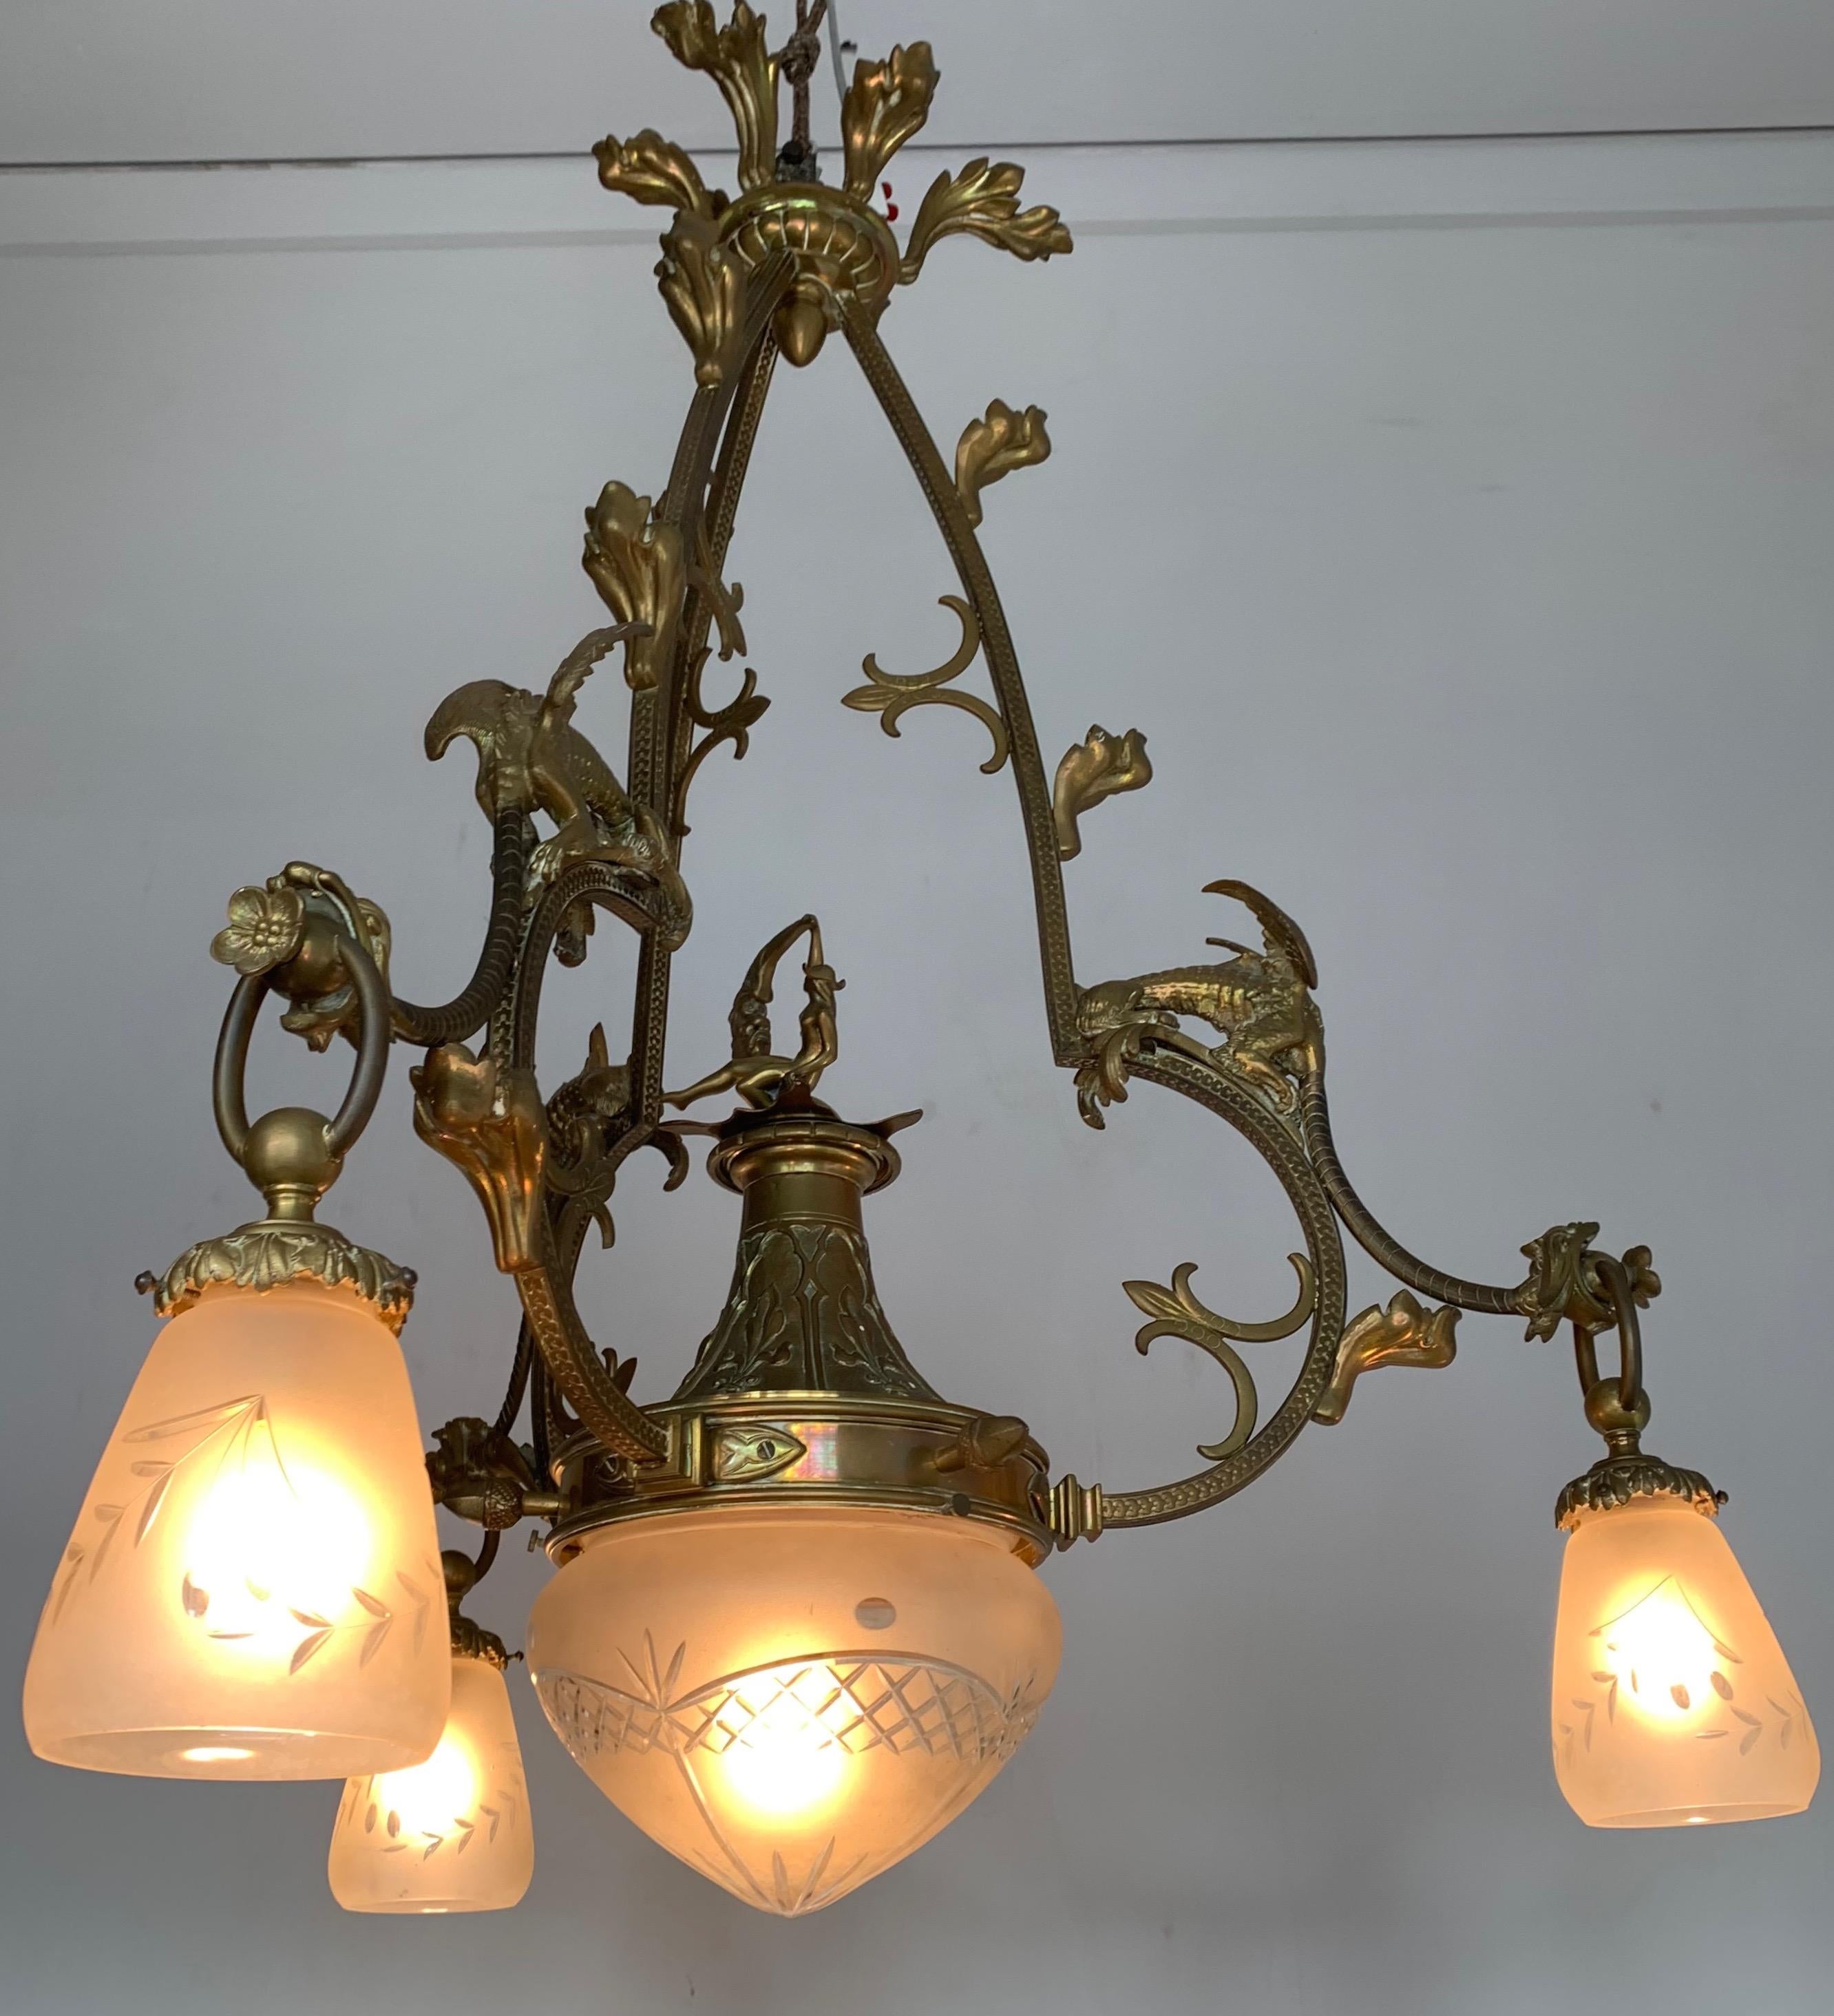 Hand-Crafted Gothic Revival Bronze Chandelier/ Pendant with Dragon Sculptures, A. Bastet Lyon For Sale